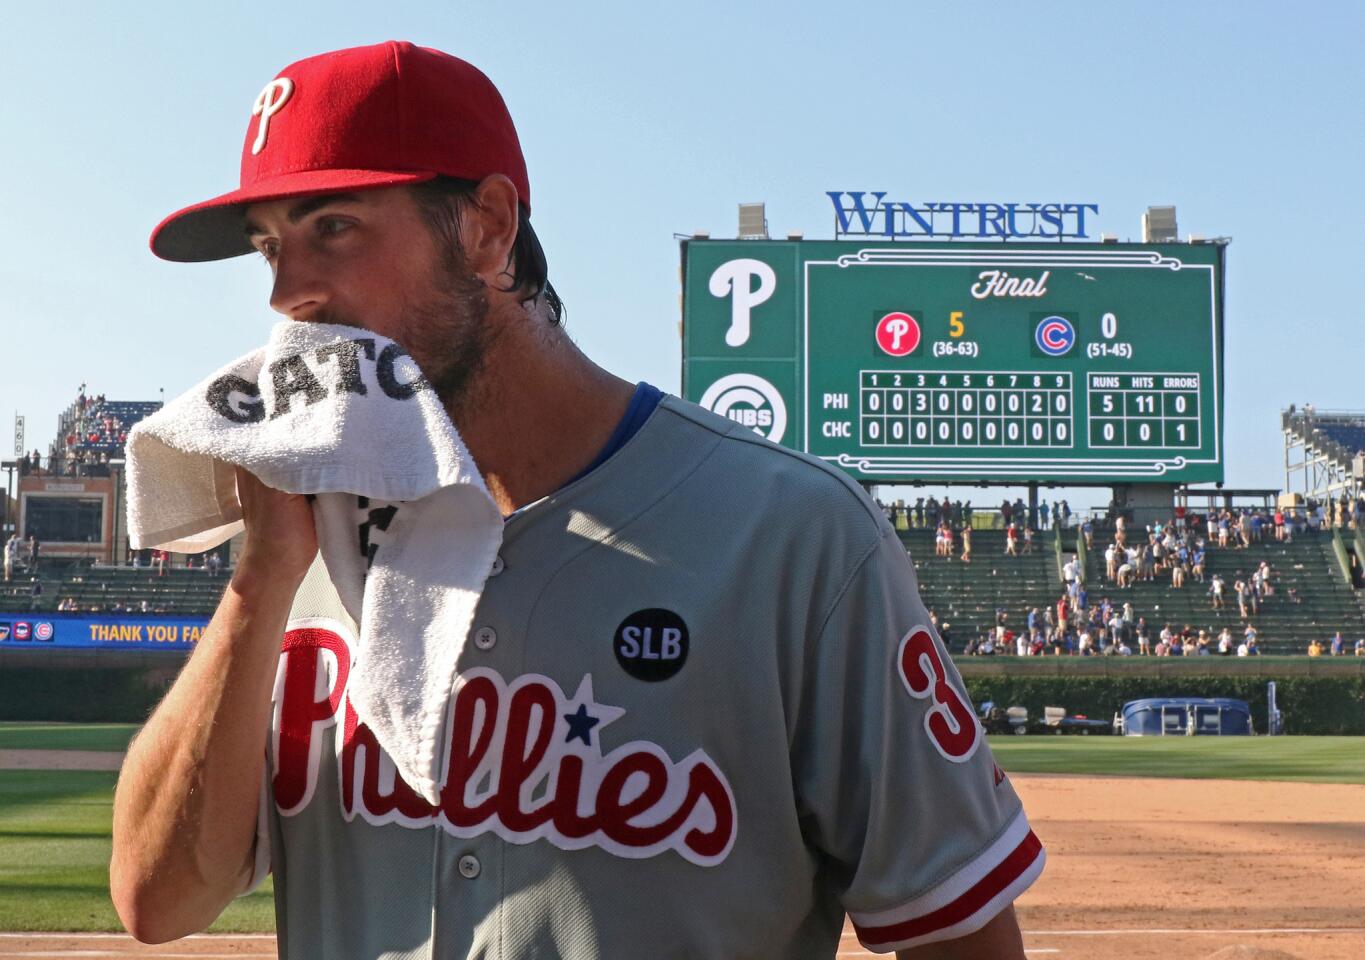 Philadelphia Phillies starting pitcher Cole Hamels wipes his face after pitching a no-hitter against the Cubs.